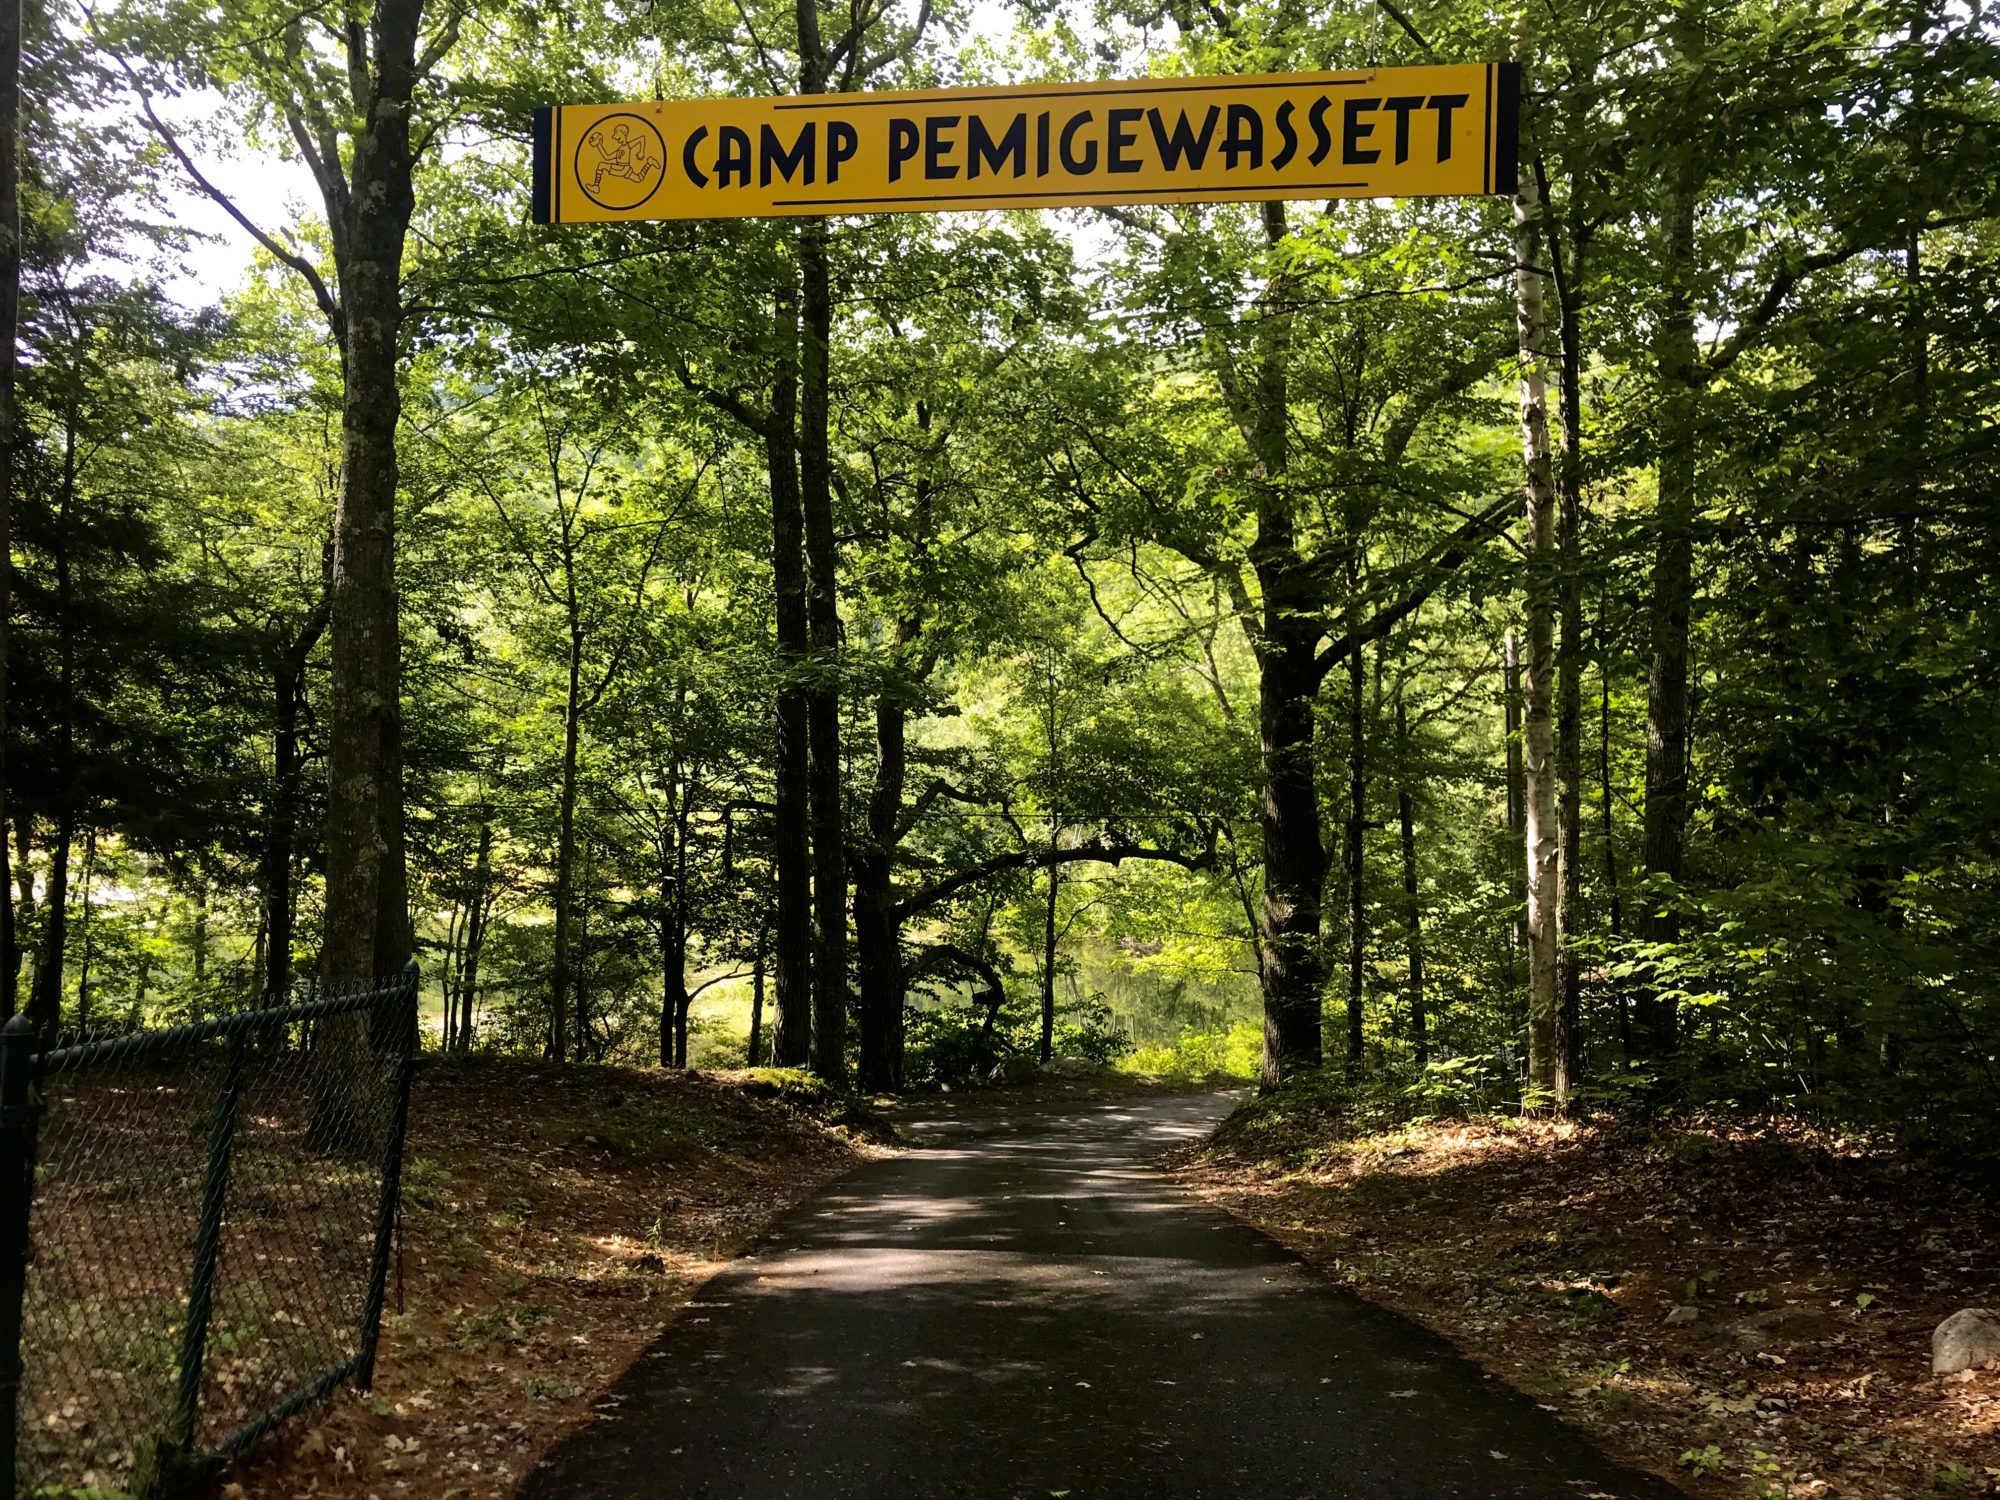 Travel to Camp Pemi. Photo of the sign over the entrance to Camp Pemigewassett